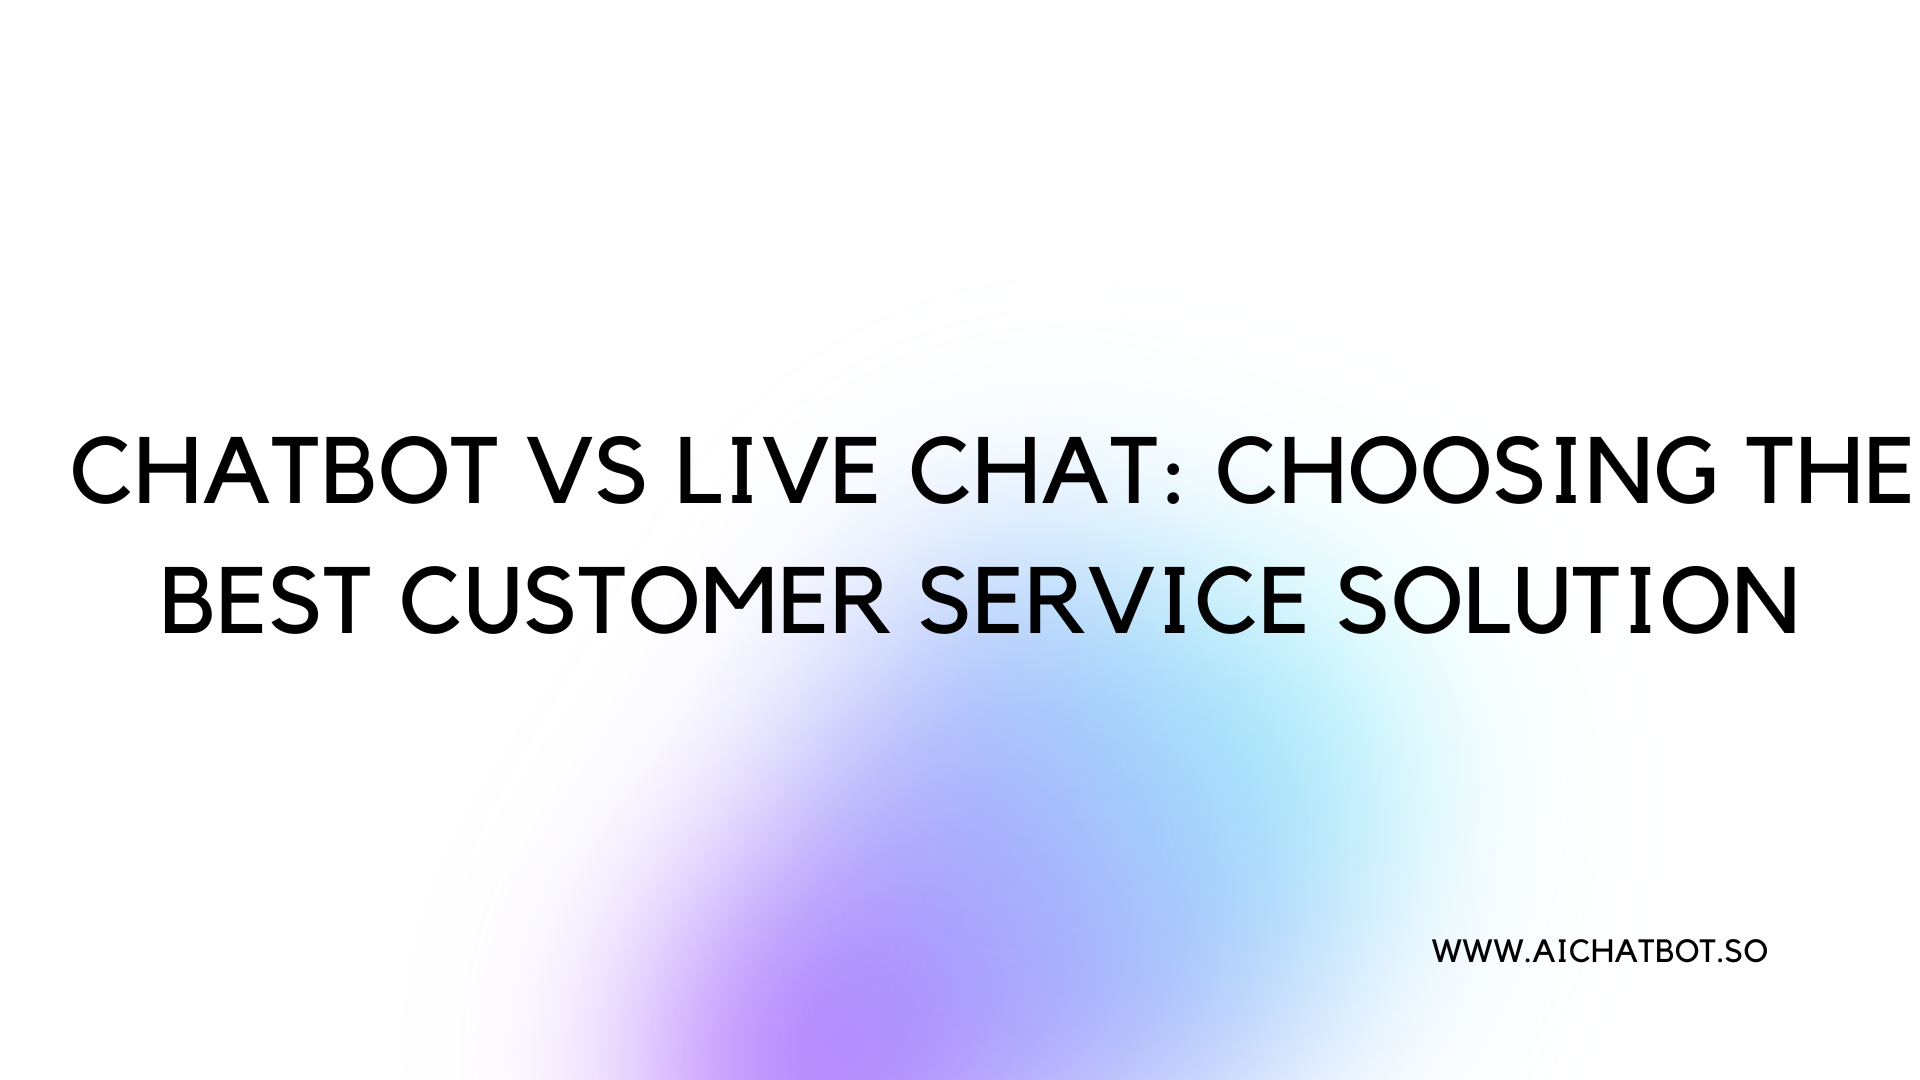 Chatbot vs Live Chat: Choosing the Best Customer Service Solution